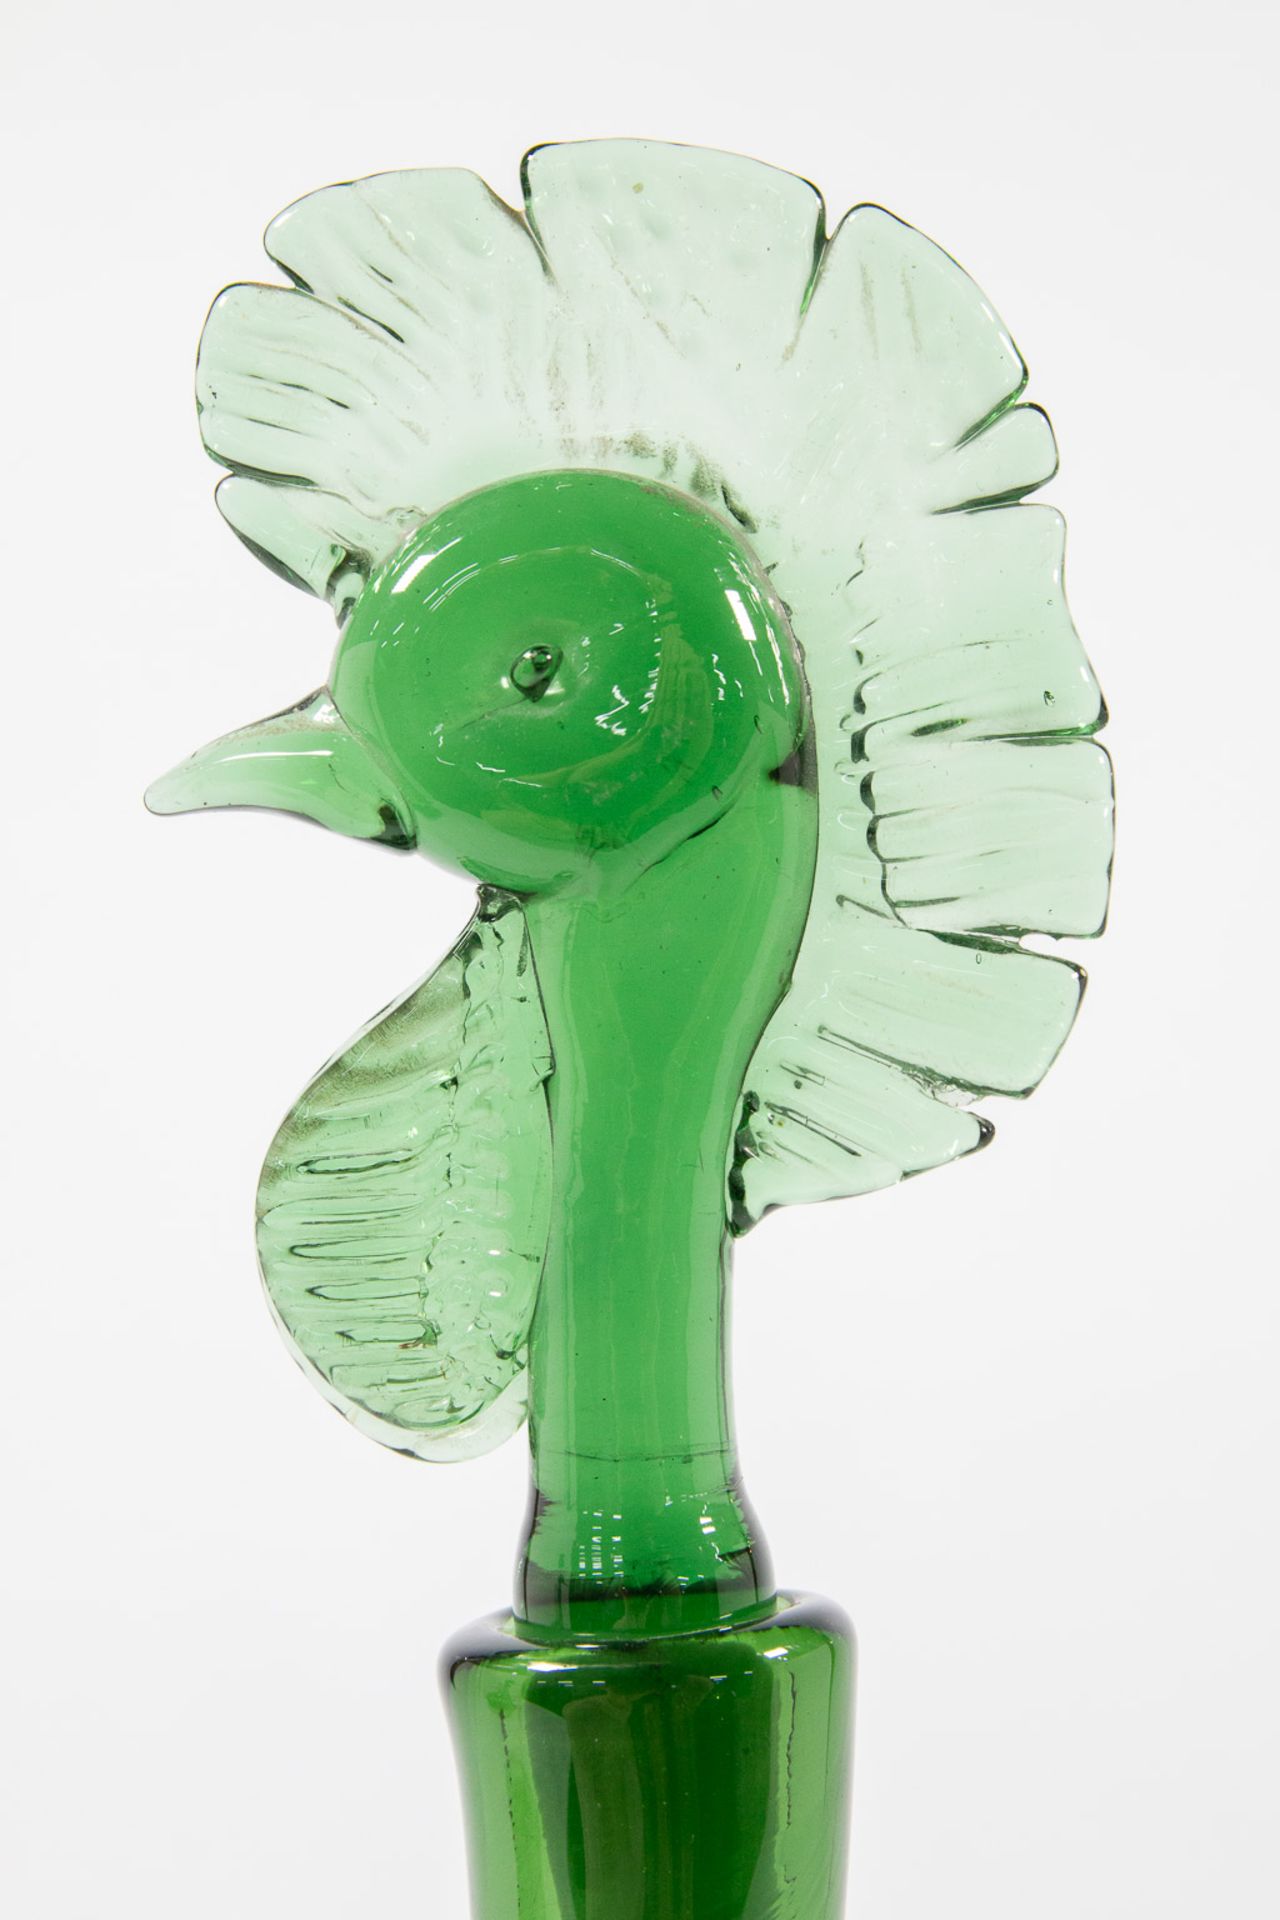 An Empoli Glass Rooster and Duck Decanter - Image 14 of 15